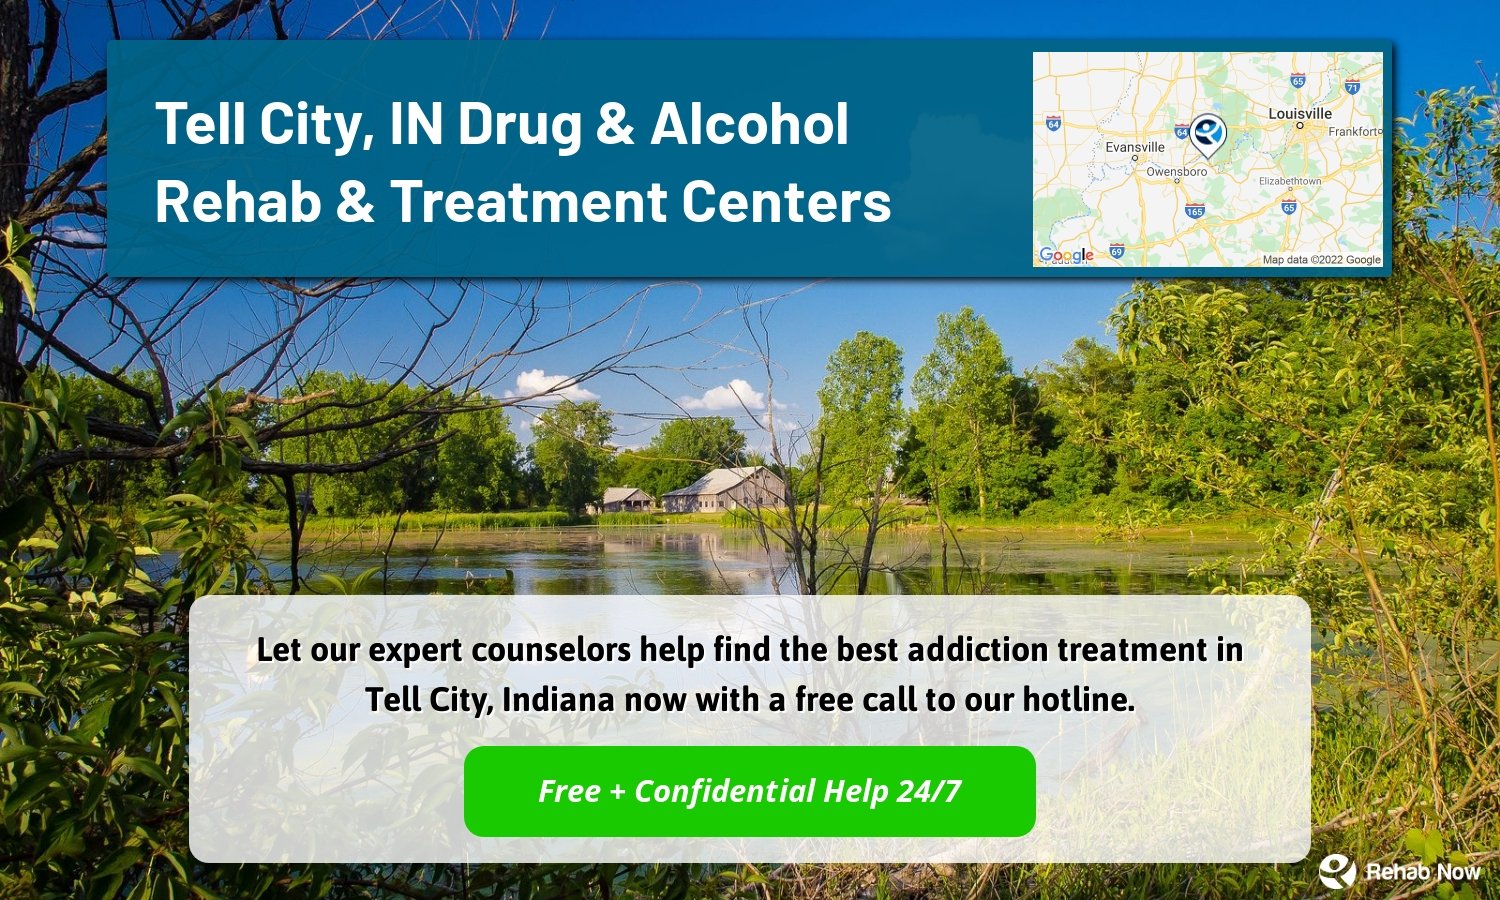 Let our expert counselors help find the best addiction treatment in Tell City, Indiana now with a free call to our hotline.